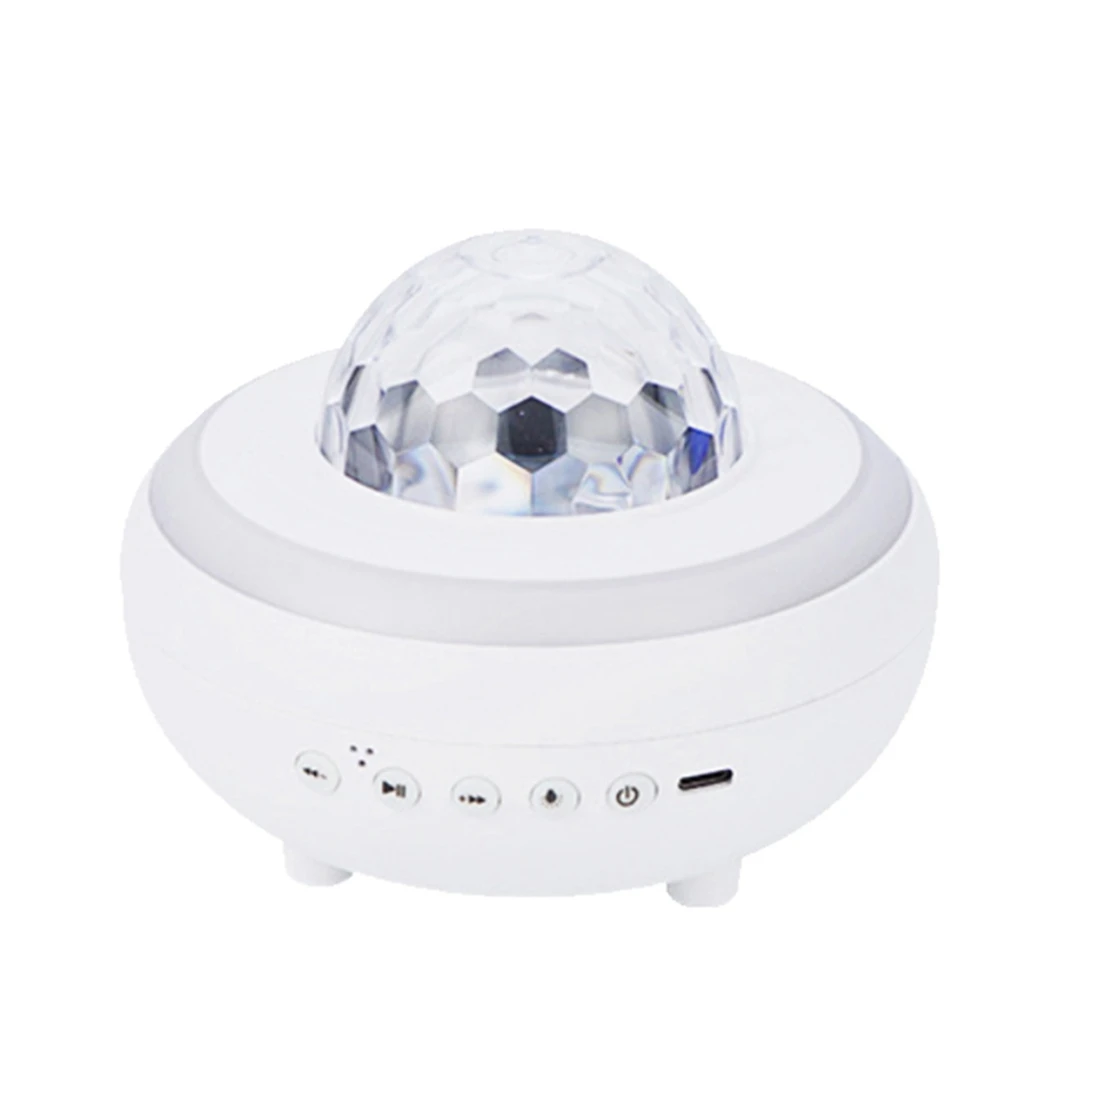 

LED Star Projector Colorful Aurora Ocean Projection Night Light with Bluetooth Music Bedroom Atmosphere Decoration White